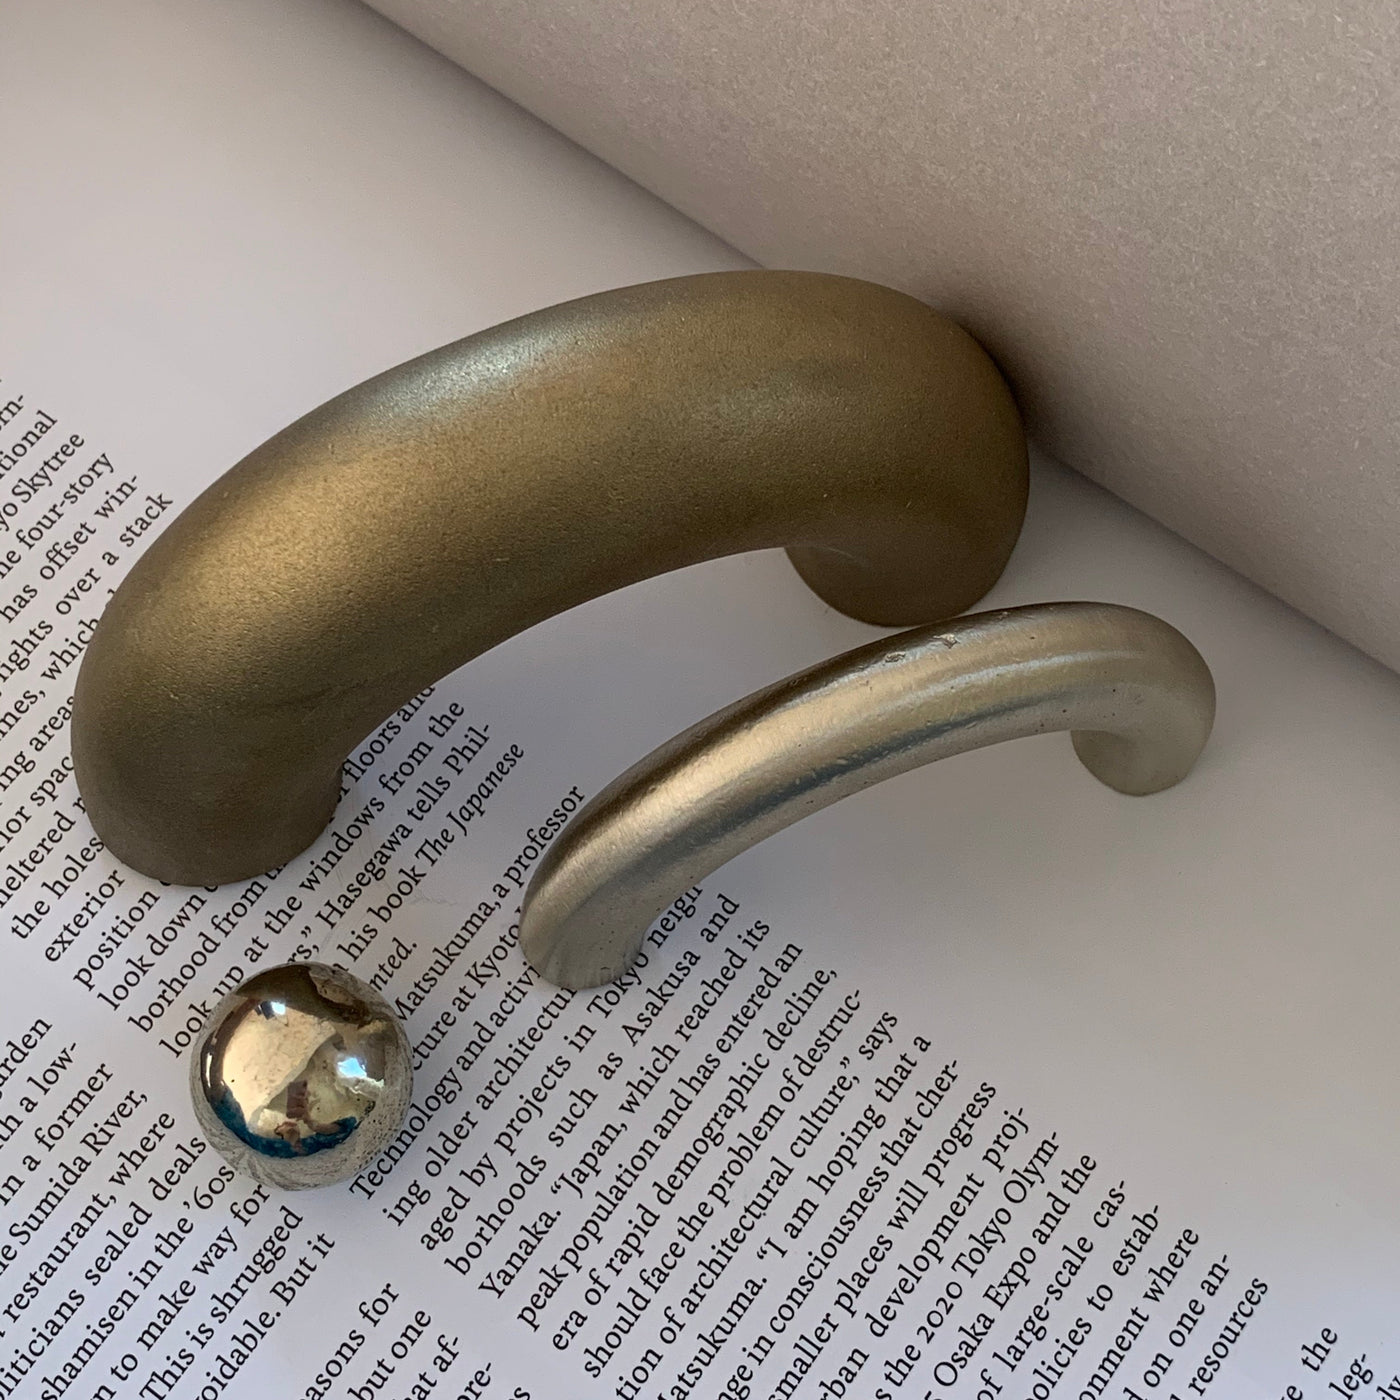 solid cast natural and white brass and bronze small cabinet hardware knob and handle by Maha Alavi